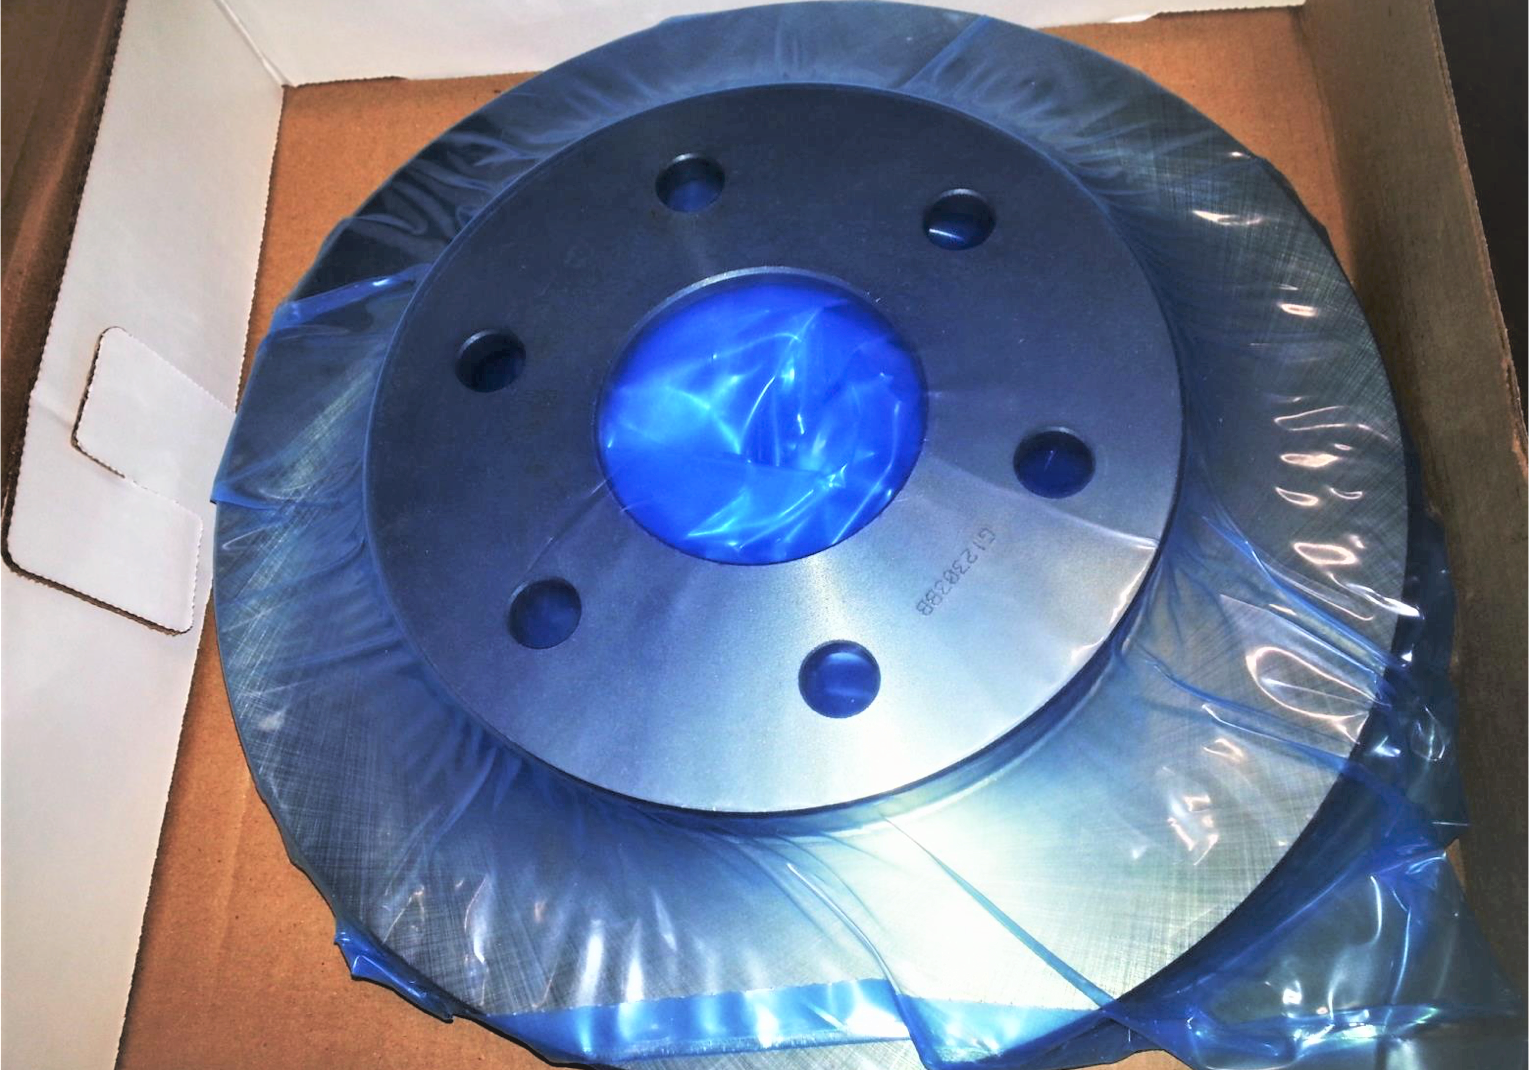 Car part in box wrapped in blue VCI film